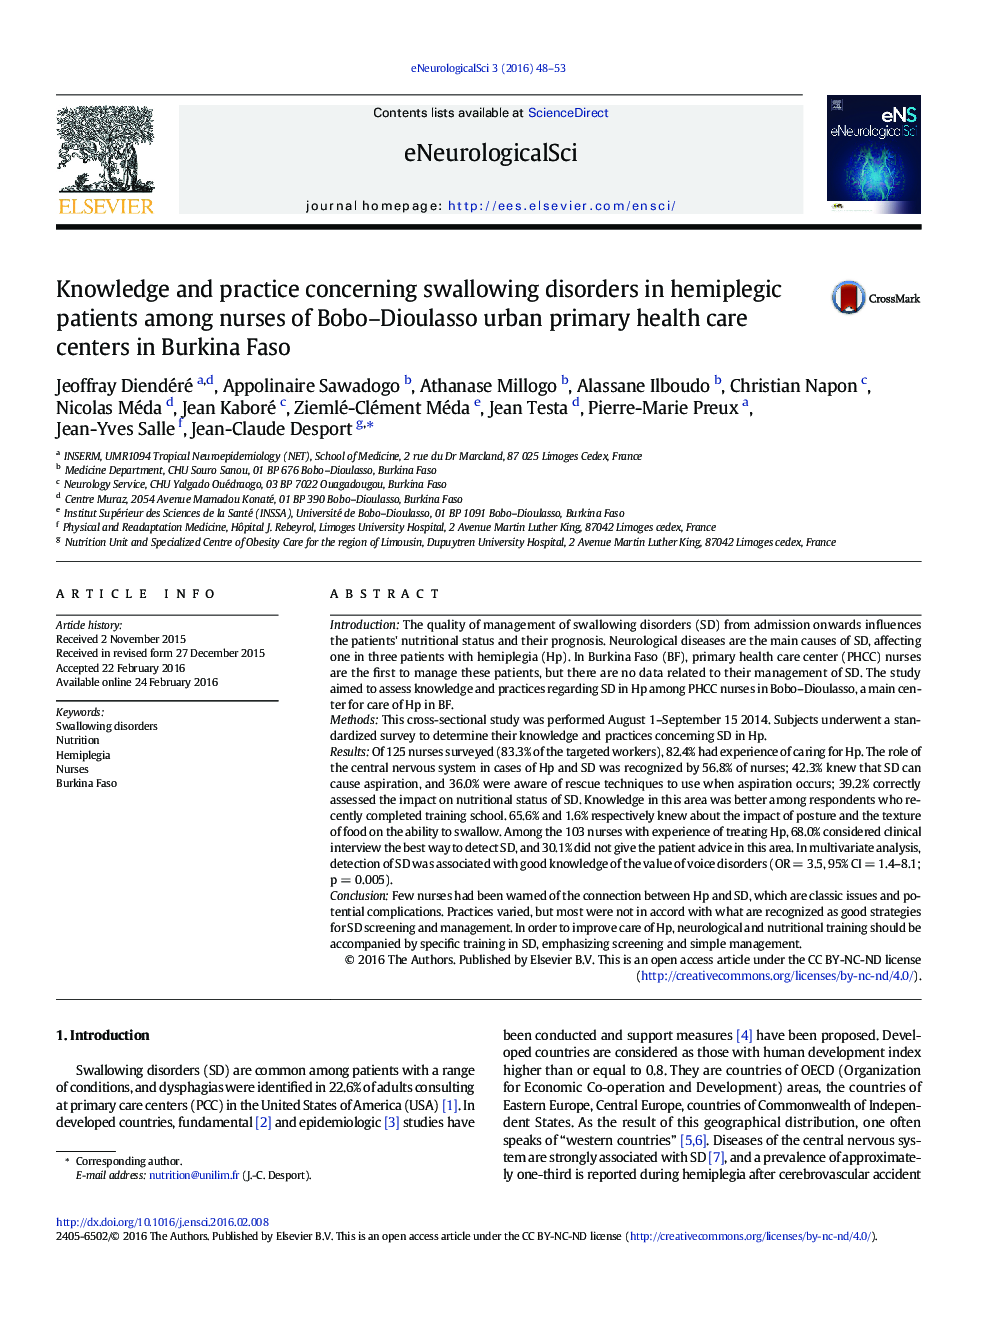 Knowledge and practice concerning swallowing disorders in hemiplegic patients among nurses of Bobo–Dioulasso urban primary health care centers in Burkina Faso